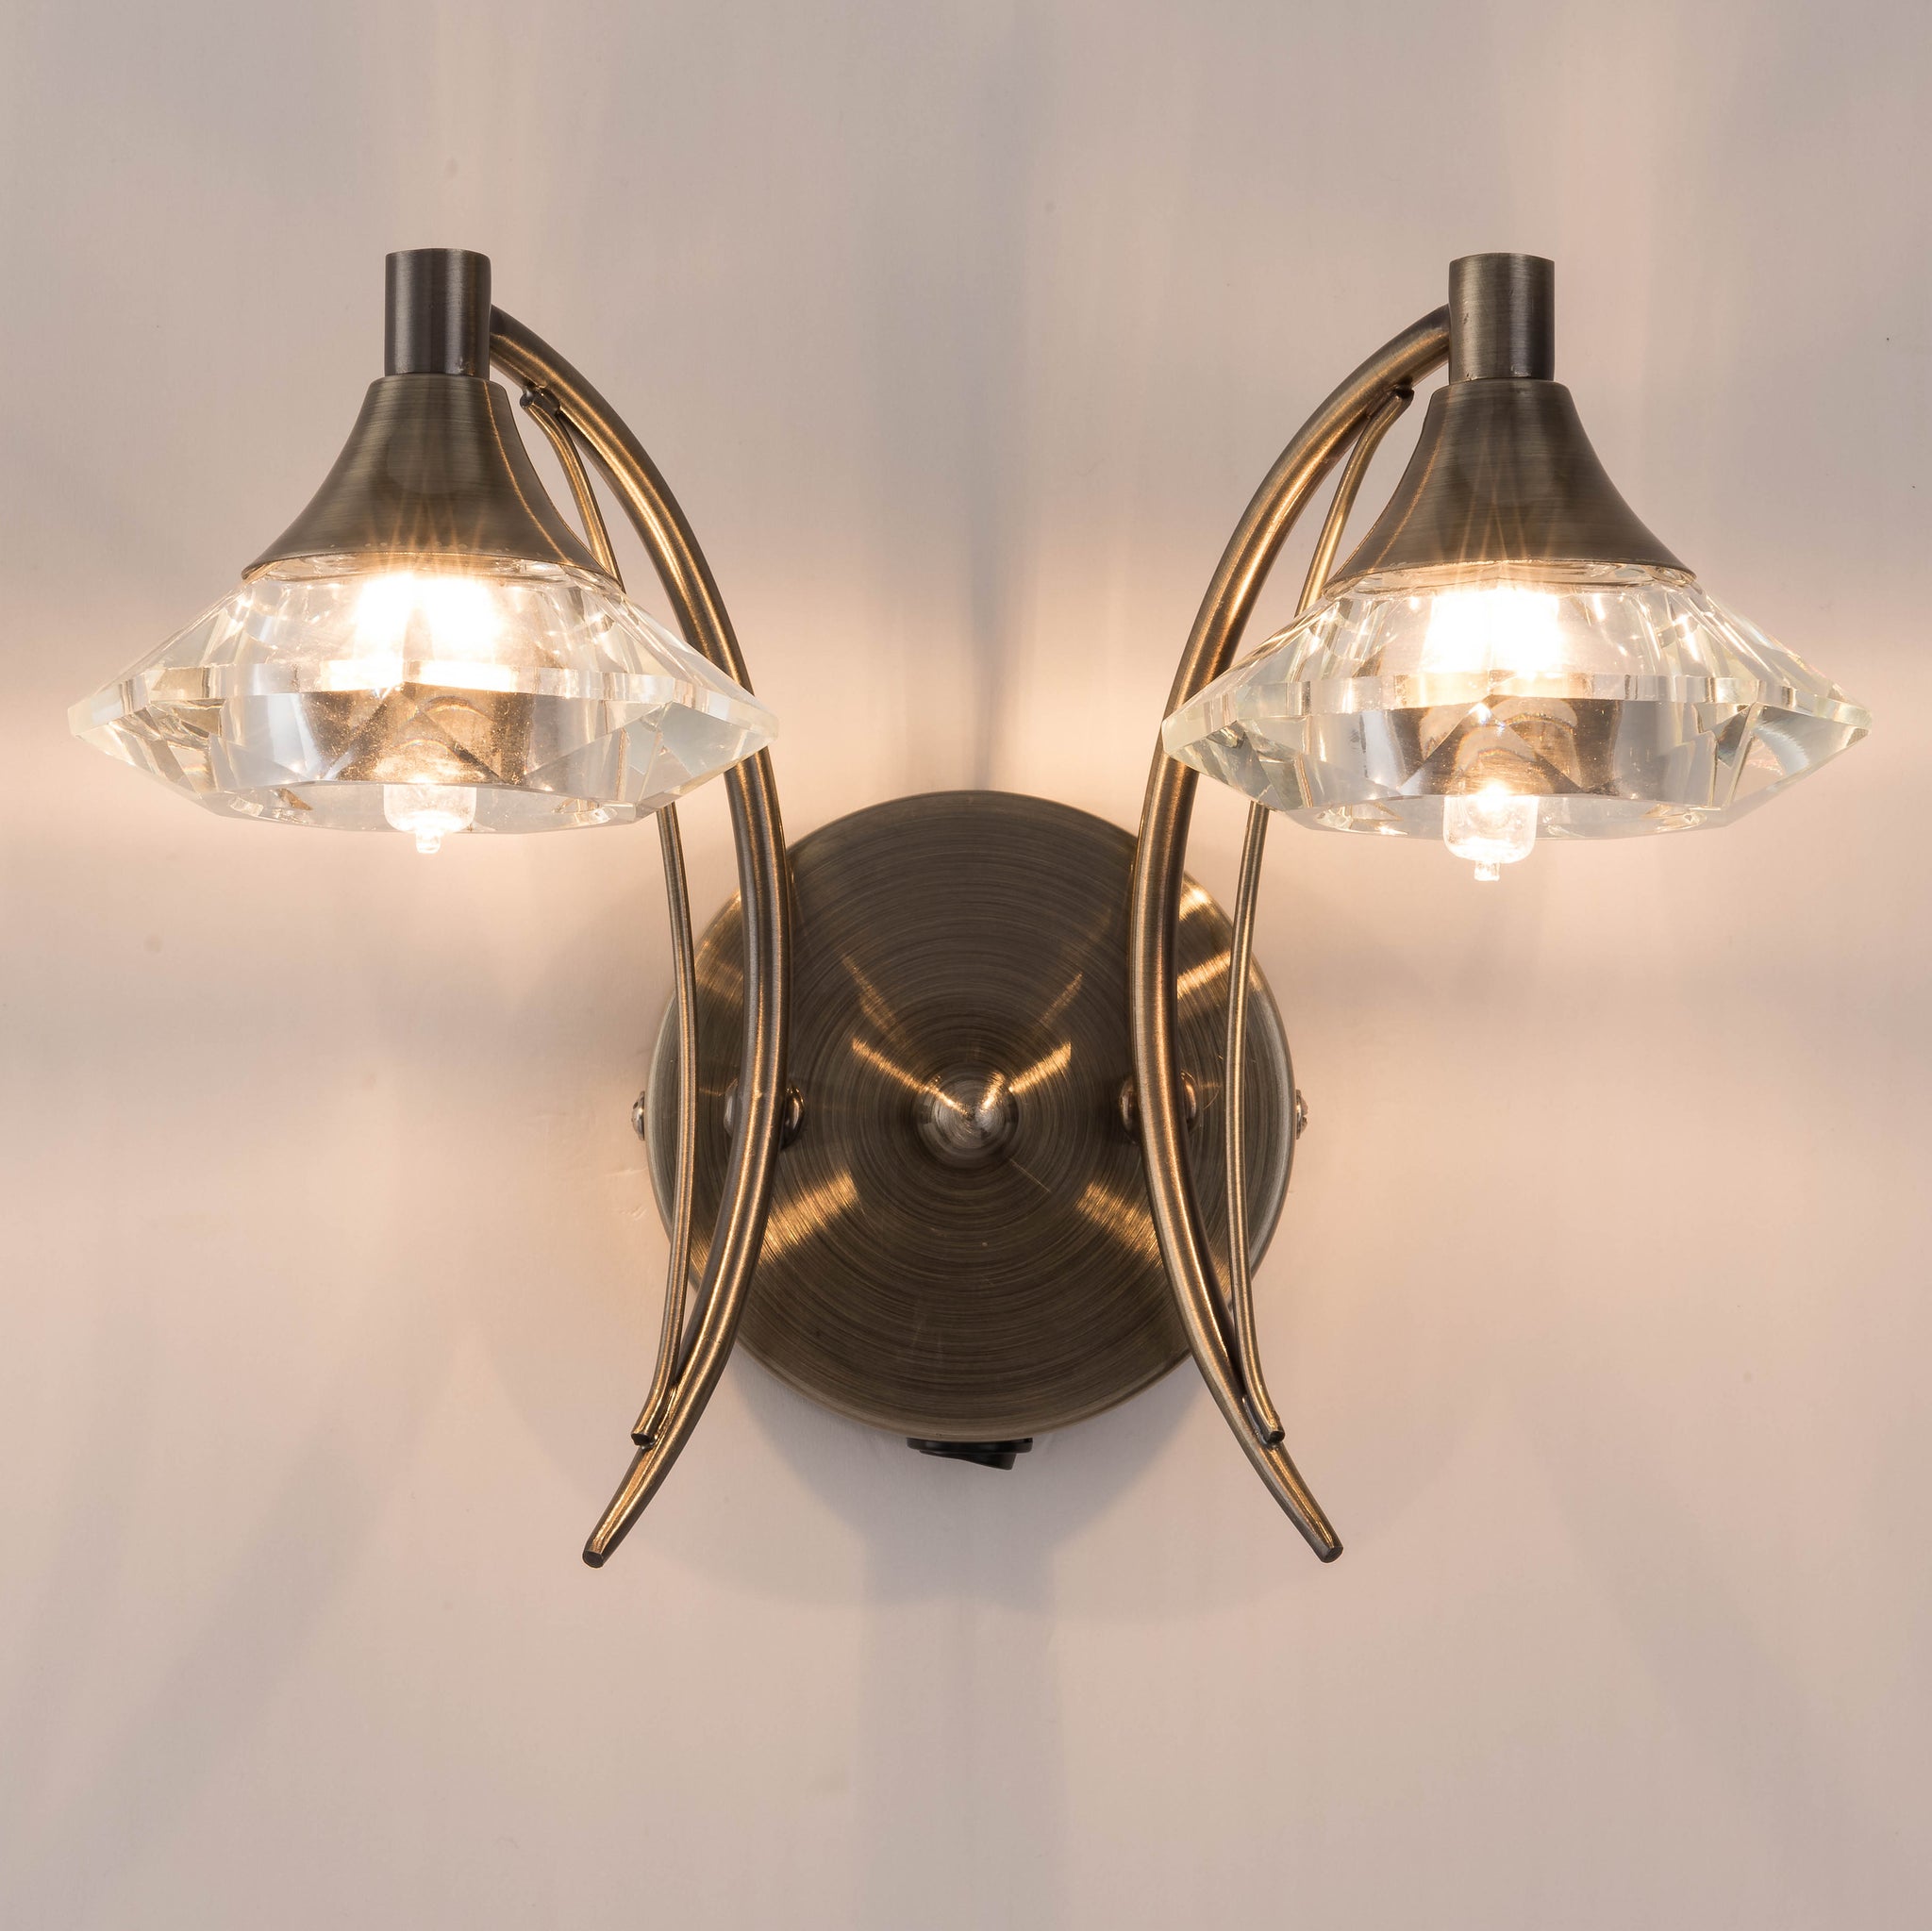 Double Wall Light and Sconce, Antique Brass Finish, Clear Glass Shades, G9 Bulb Cap